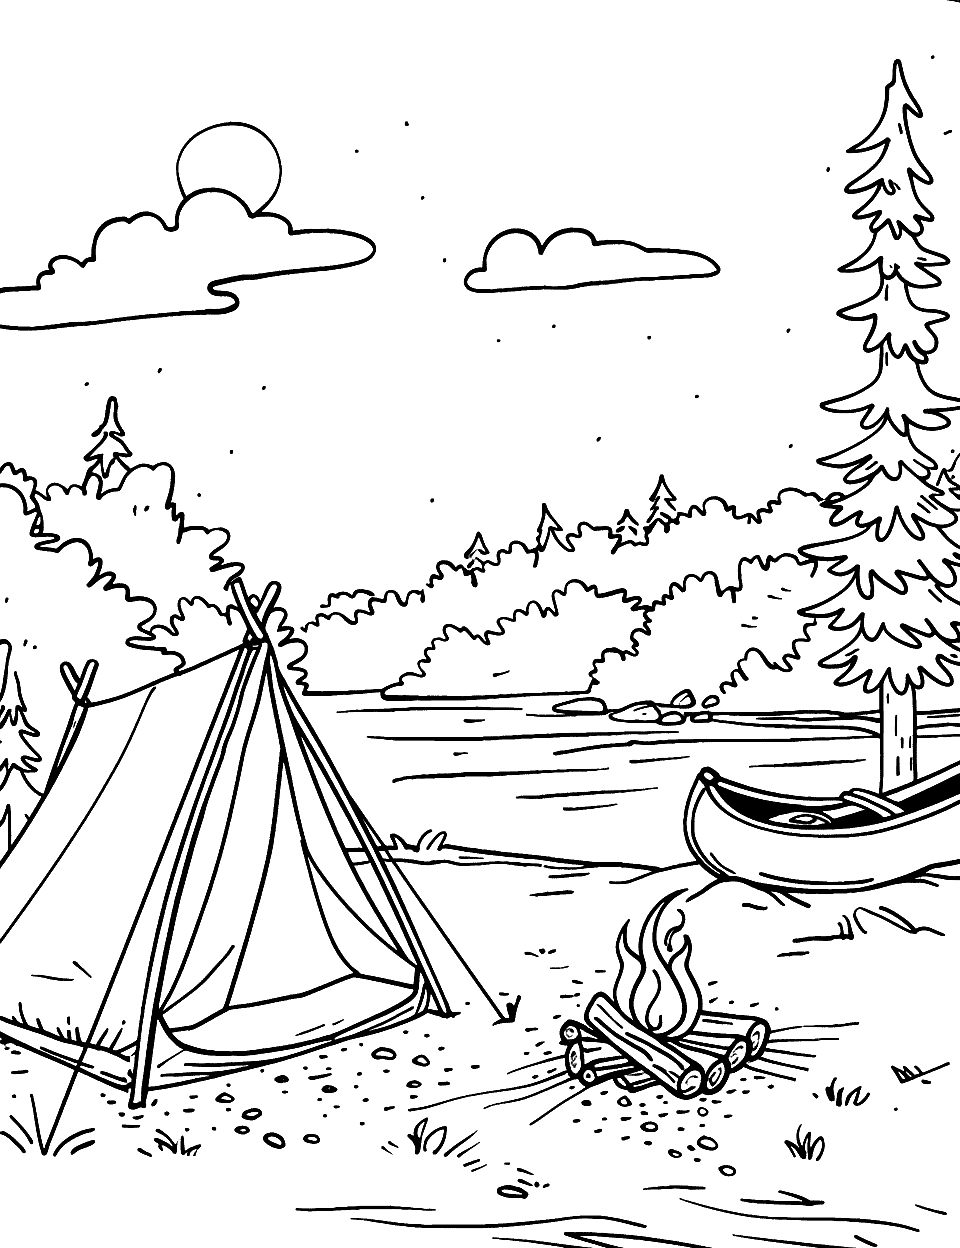 Canoe Trip Rest Stop Camping Coloring Page - A canoe next to a tent on the riverbank, with a campfire.